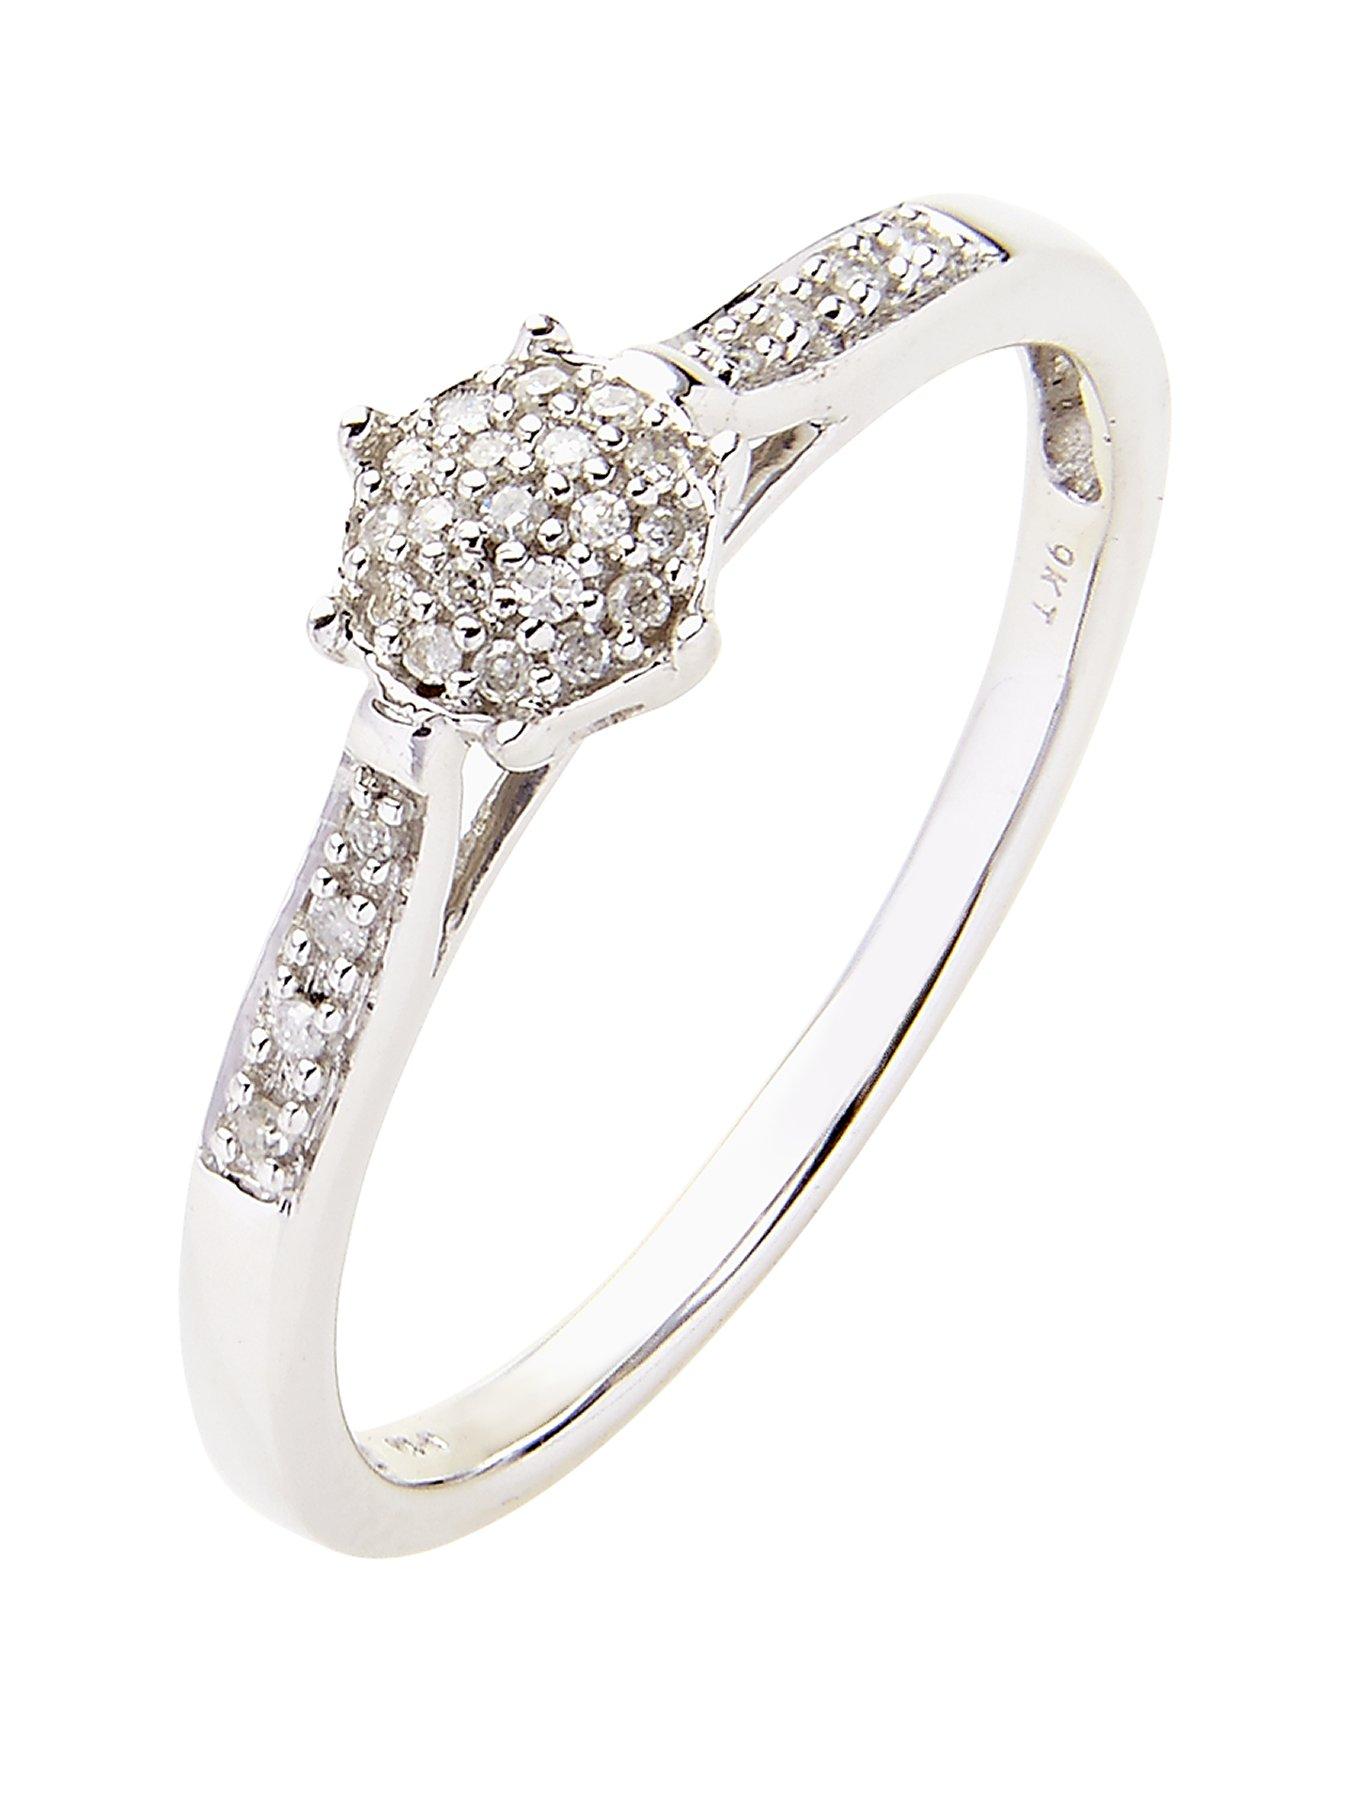 Women 9 Carat White Gold 10 Point Diamond Cluster Ring With Diamond Set Shoulders